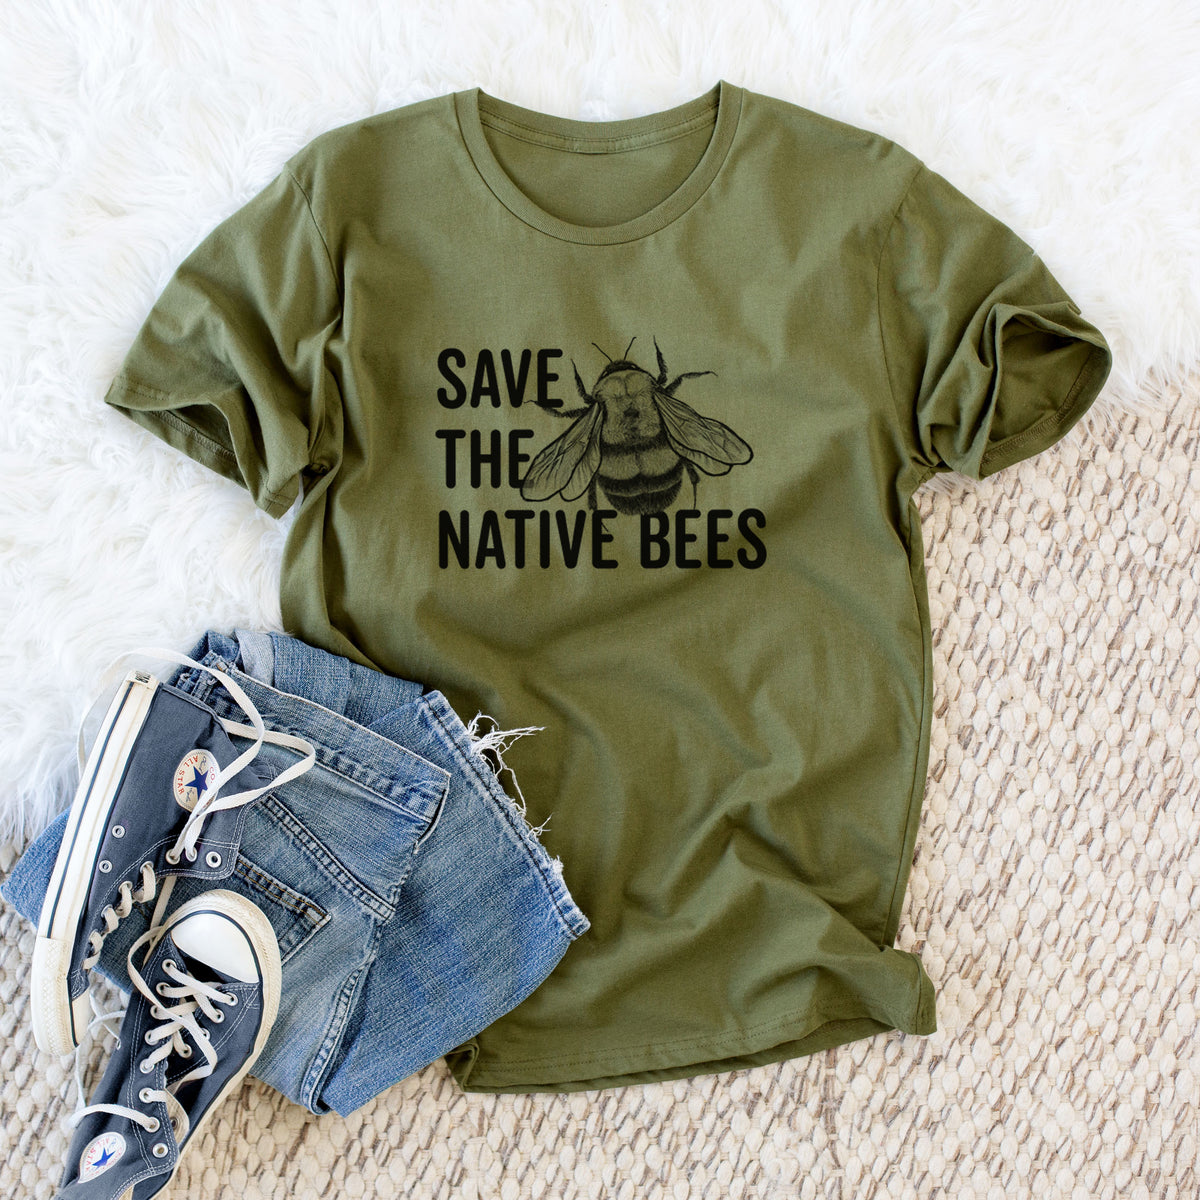 Save the Native Bees - Unisex Crewneck - Made in USA - 100% Organic Cotton